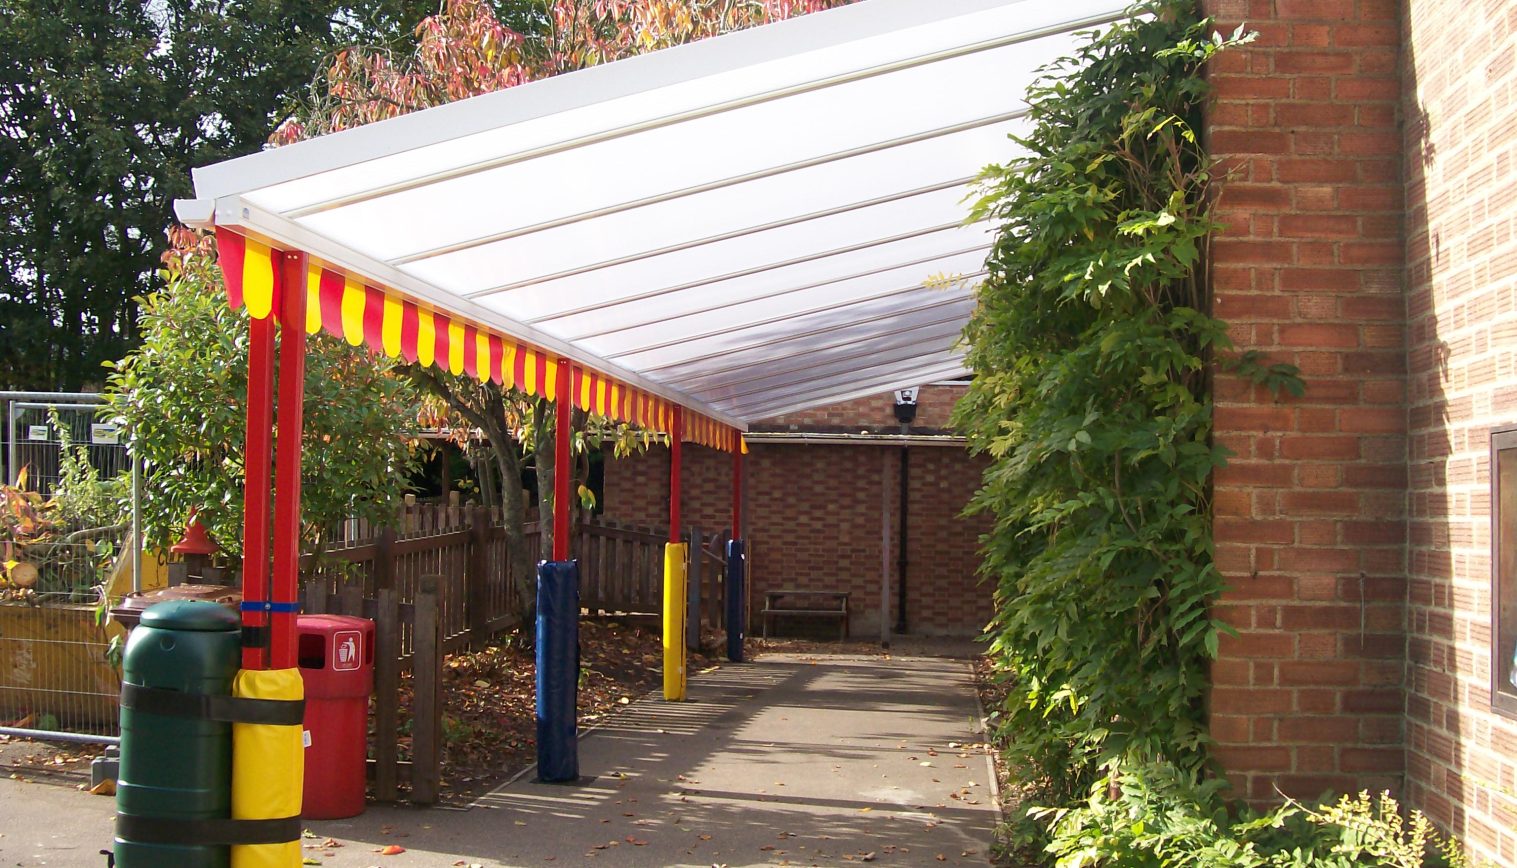 St Edmundsbury C of E Primary School – Wall Mounted Canopy